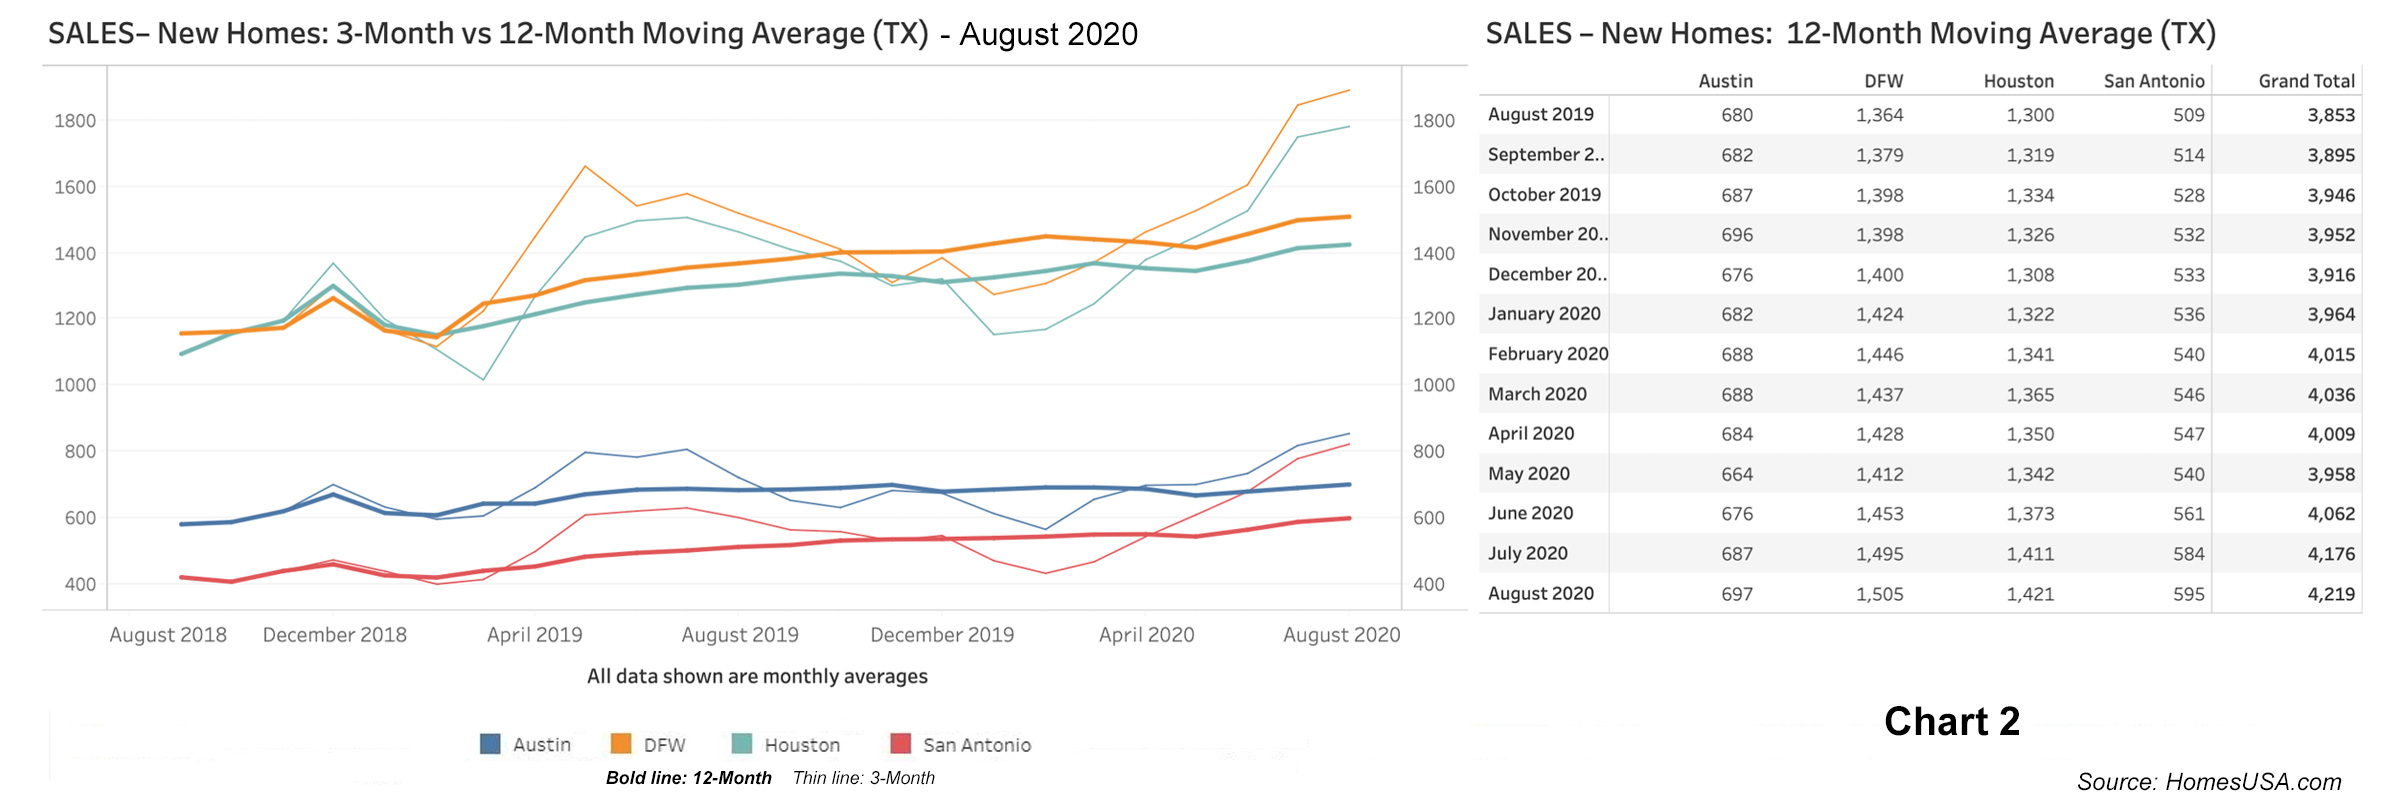 Chart 1: Texas New Homes: Days on Market - August 2020